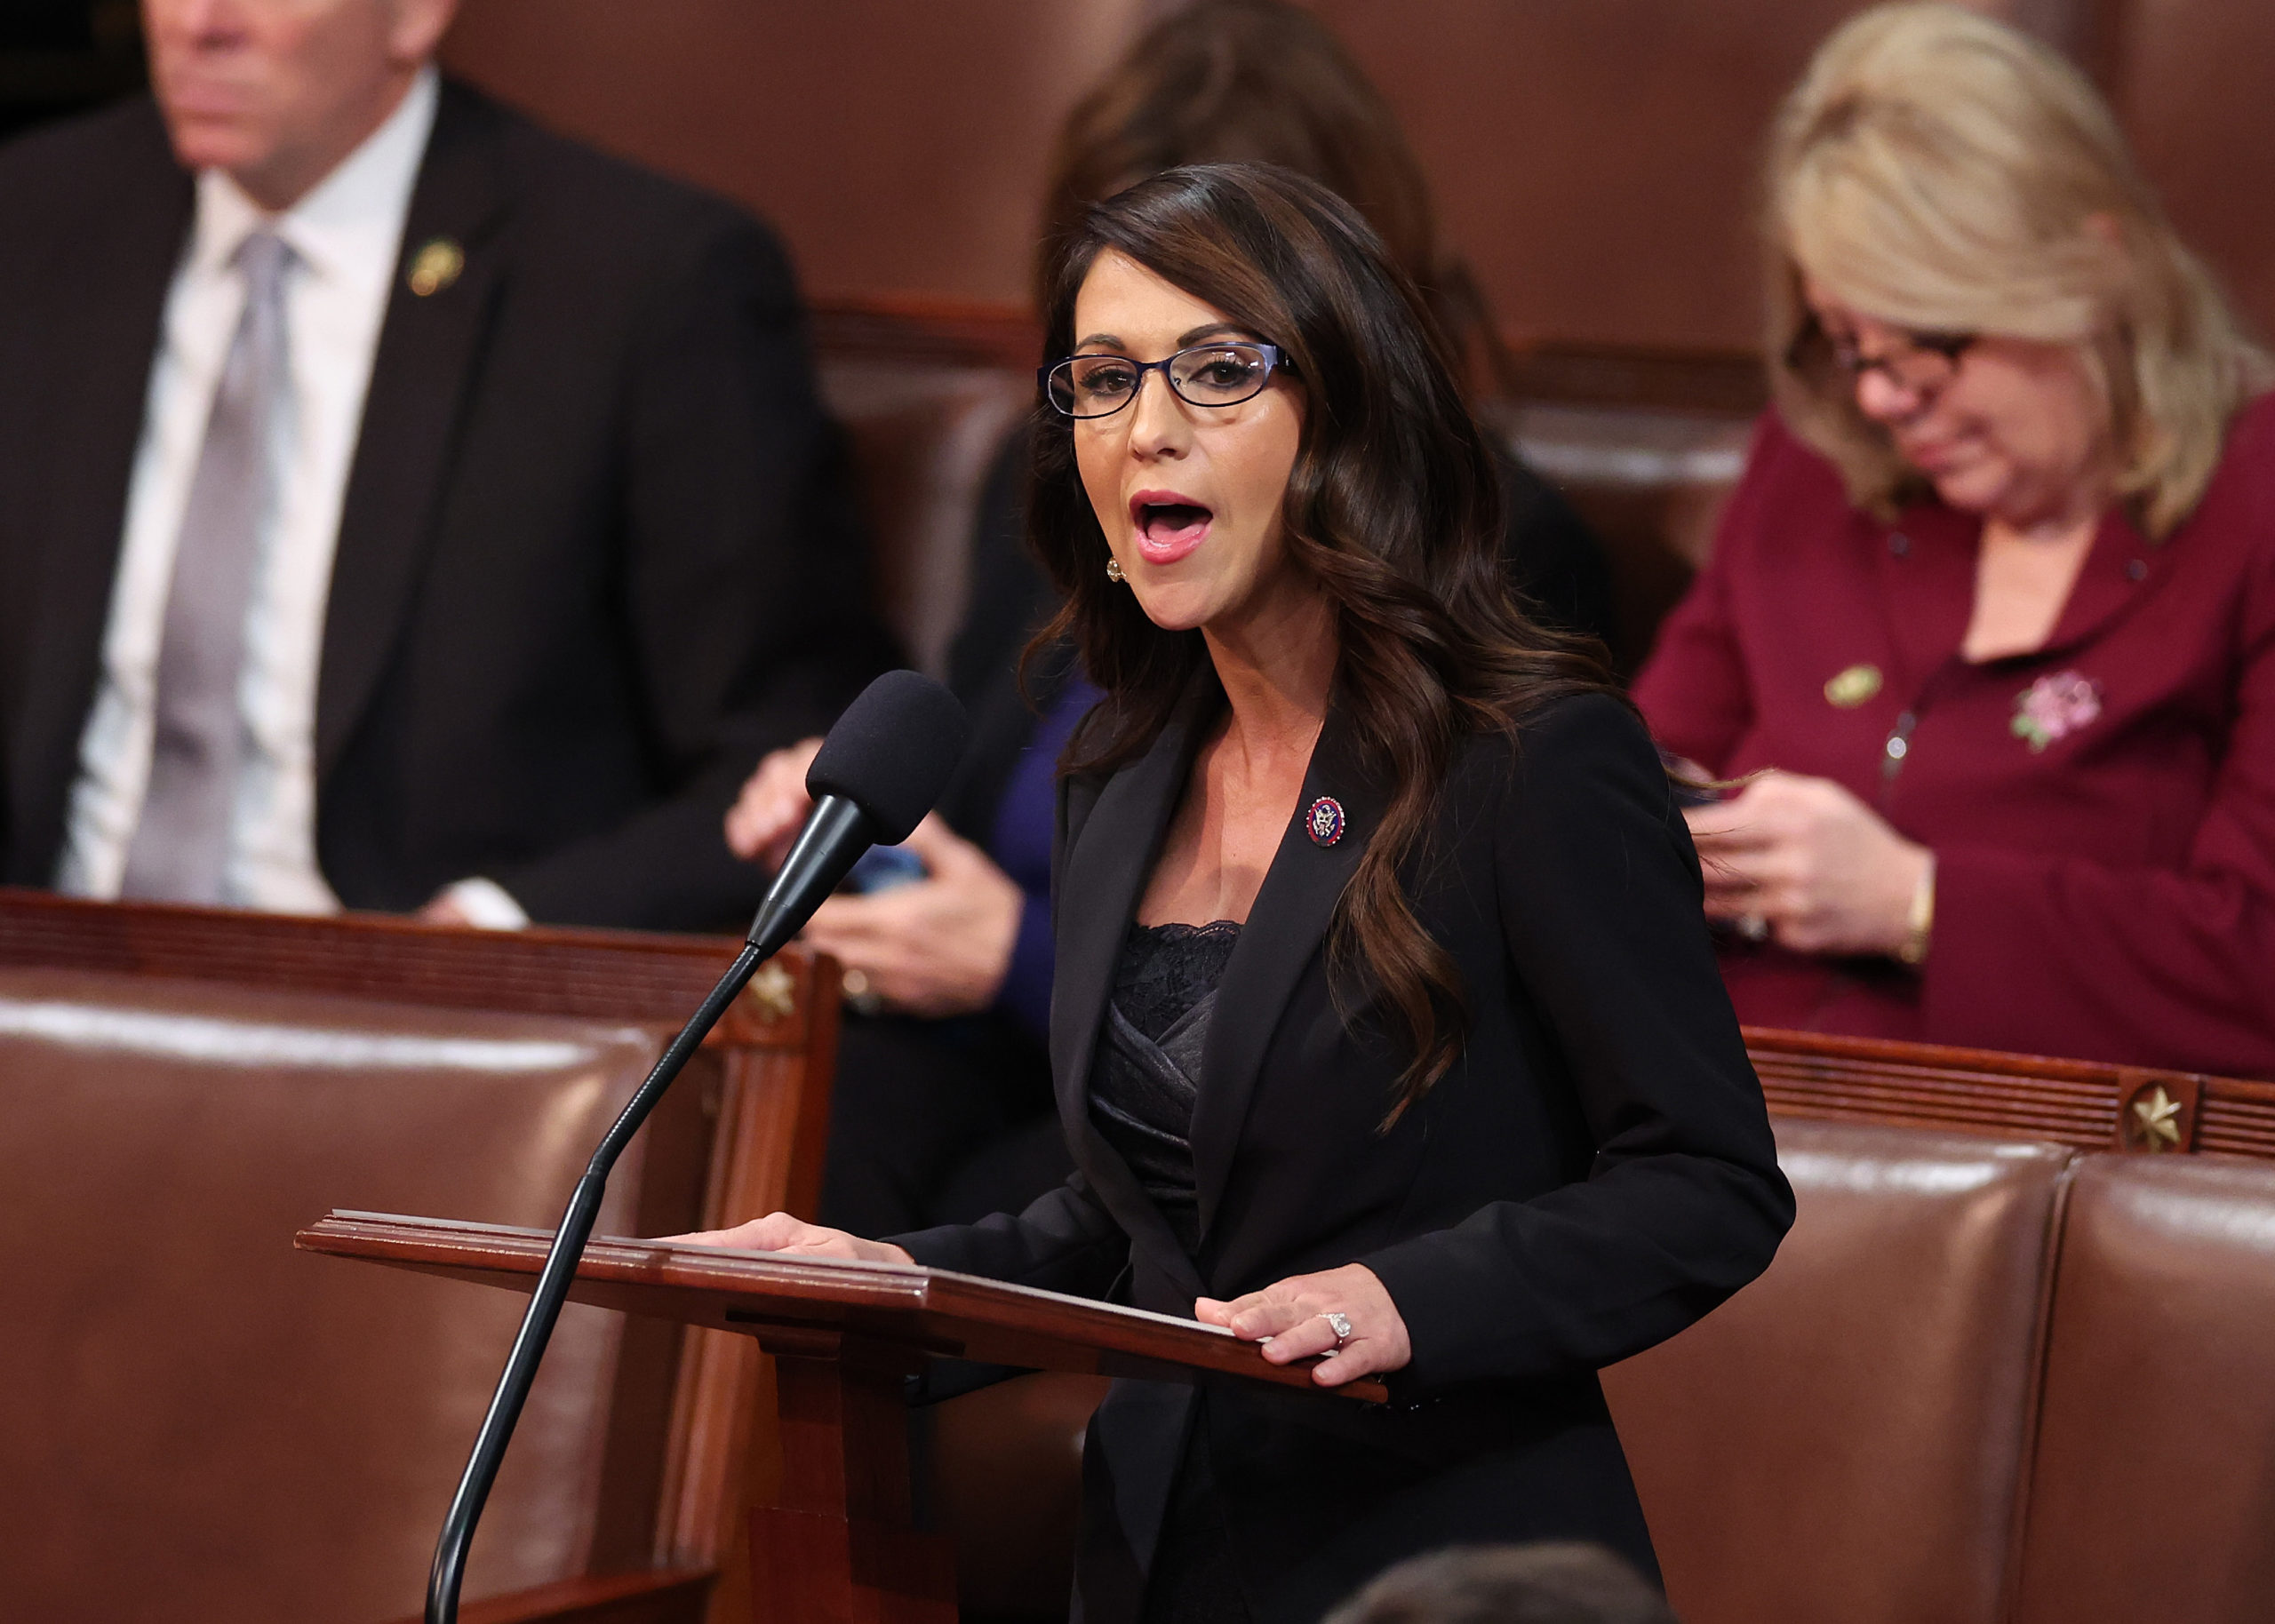 WASHINGTON, DC - JANUARY 06: U.S. Rep.-elect Lauren Boebert (R-CO) delivers remarks in the House Chamber during the fourth day of elections for Speaker of the House at the U.S. Capitol Building on January 06, 2023 in Washington, DC. (Photo by Win McNamee/Getty Images)